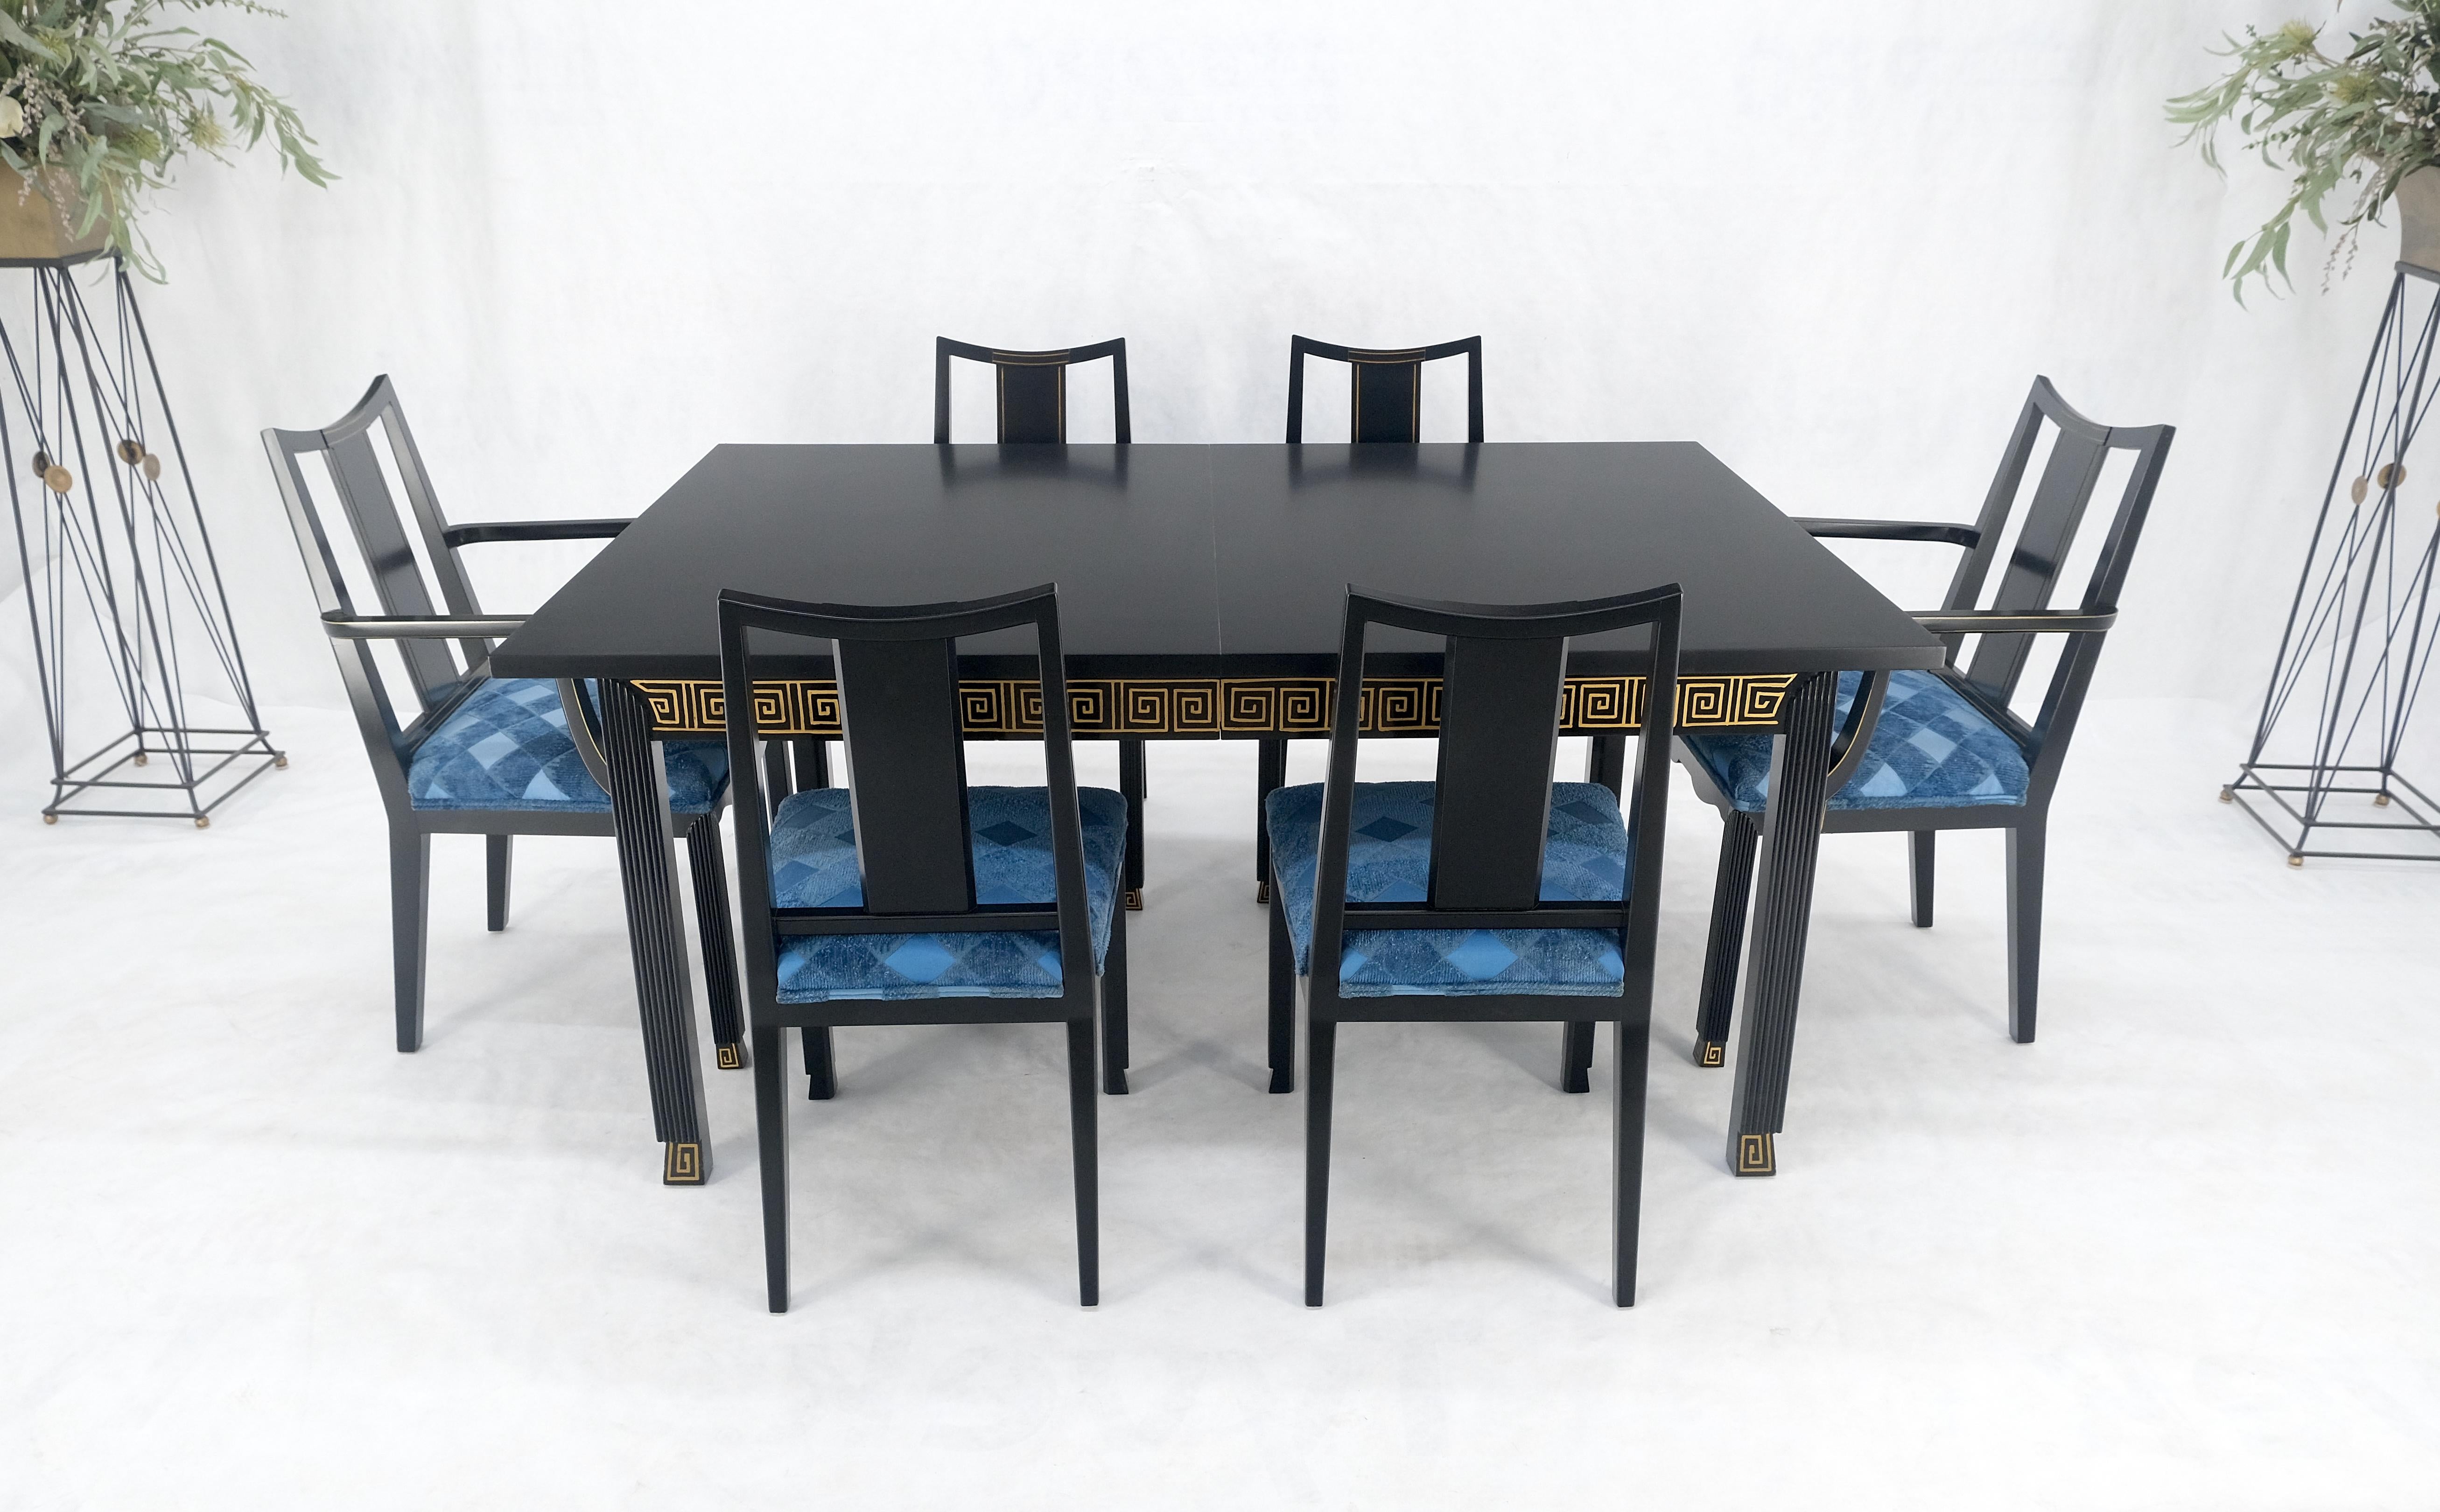 Black Lacquer Gold Ornament Decorated 6 Chairs 2 Leaves Dining Table Set MINT! In Good Condition For Sale In Rockaway, NJ